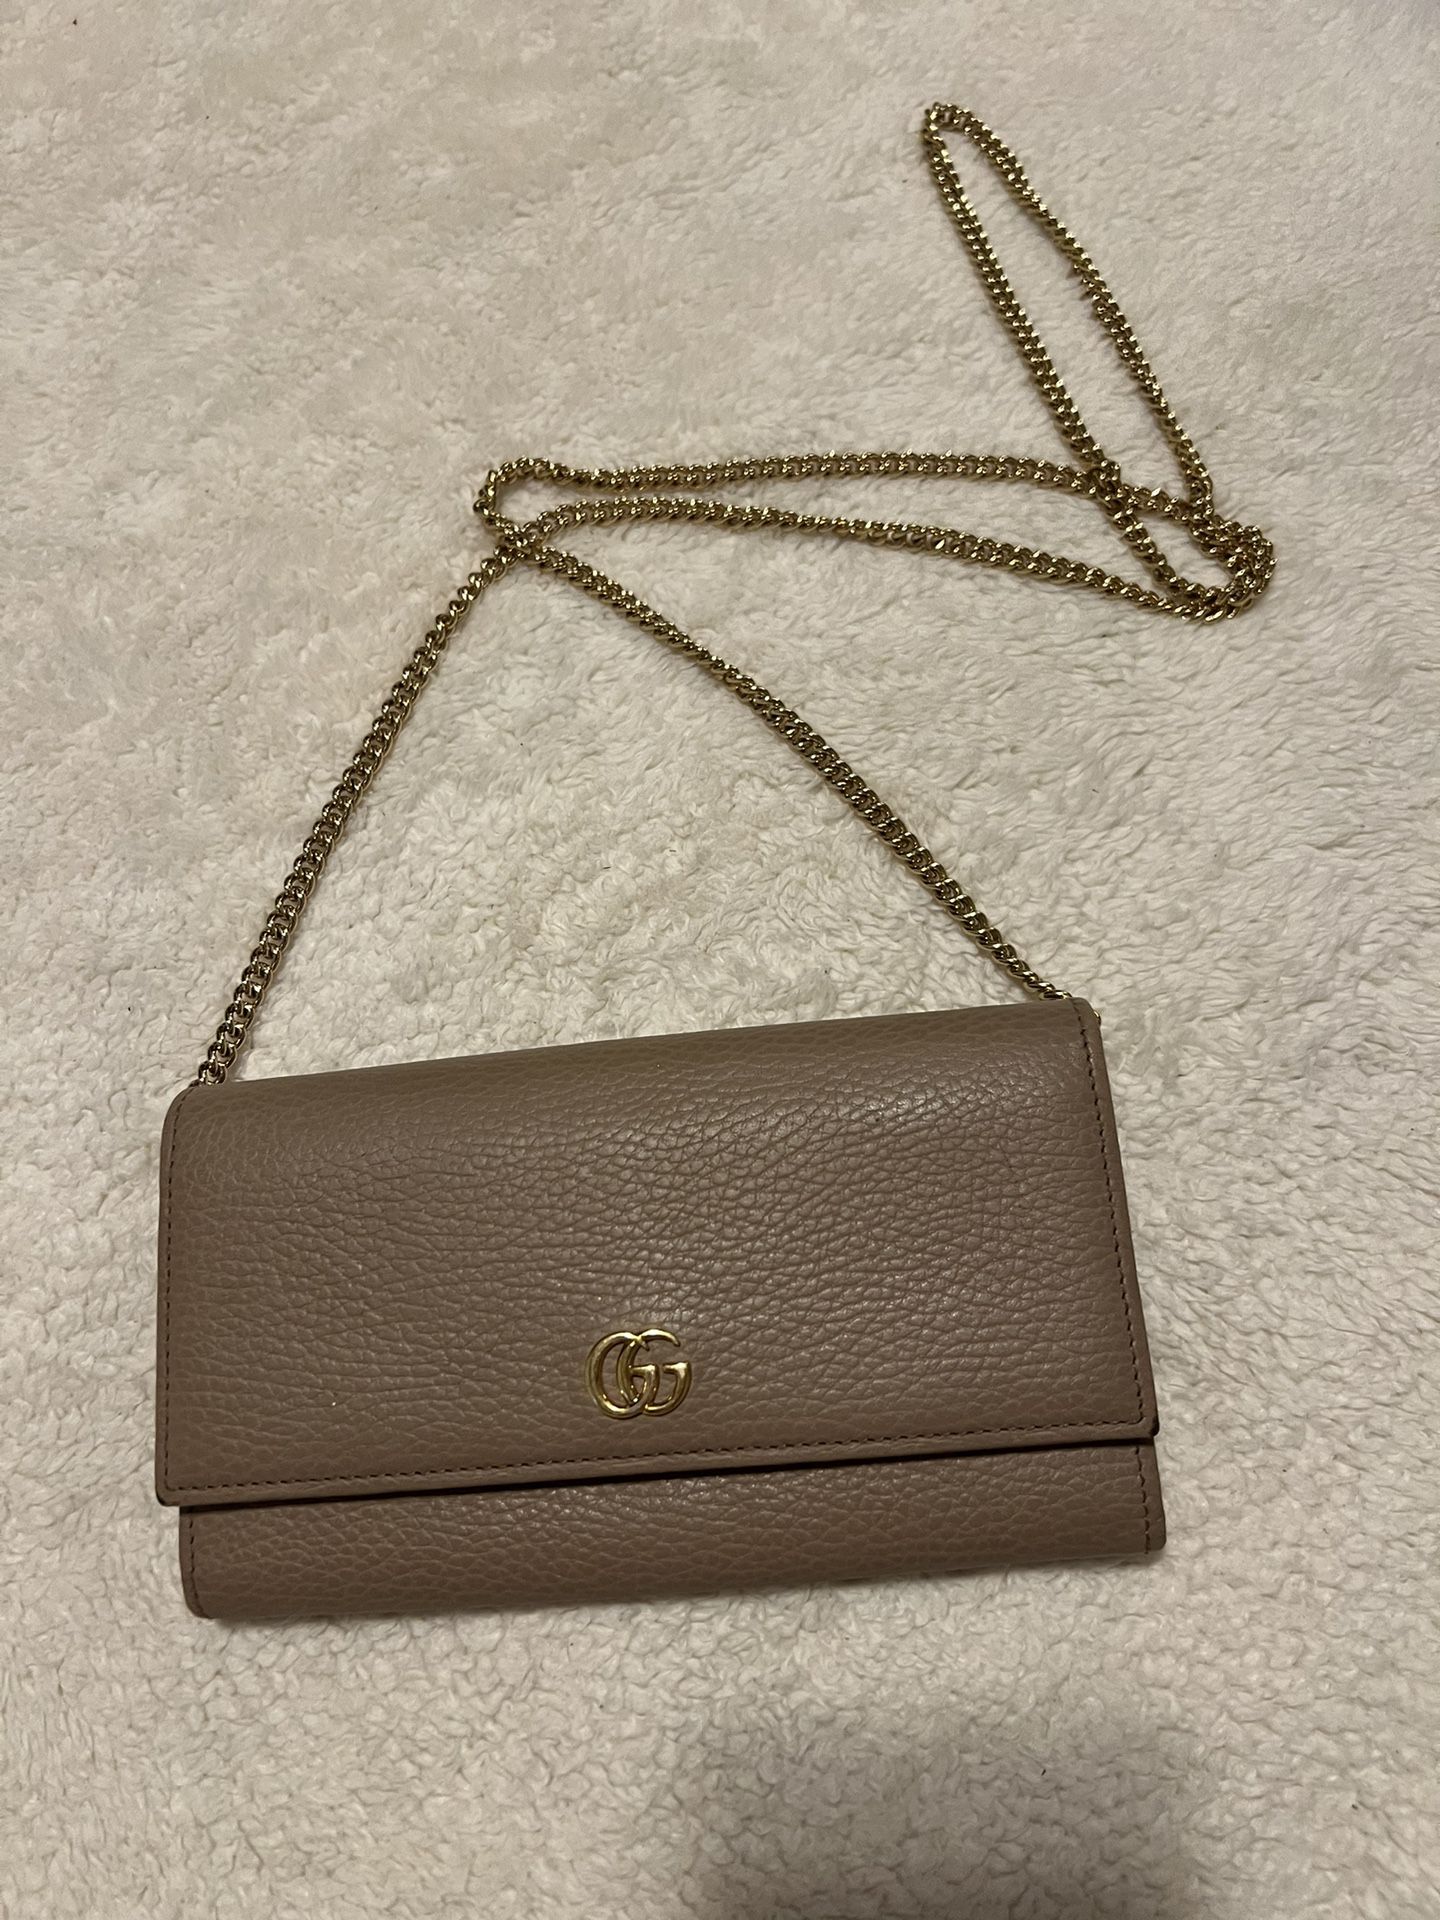 Gucci GG Marmont Chained wallet